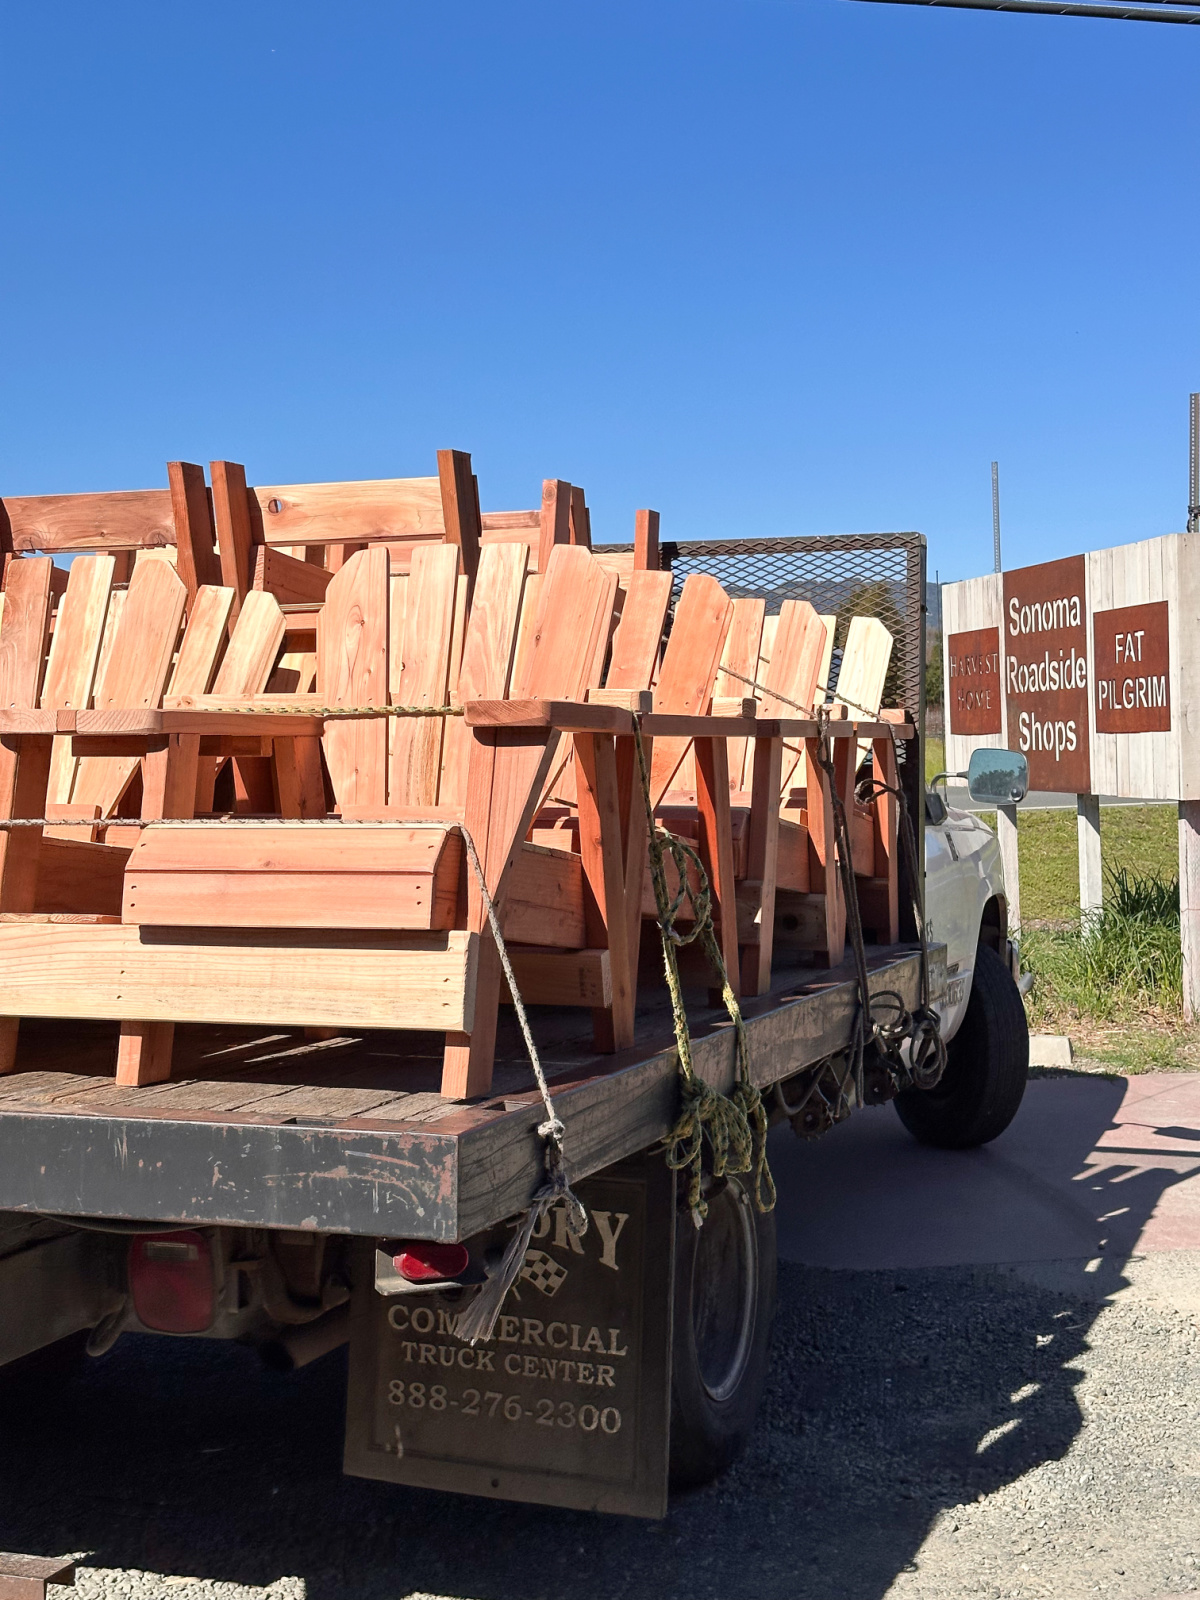 Adirondack chairs on back of flatbed truck.